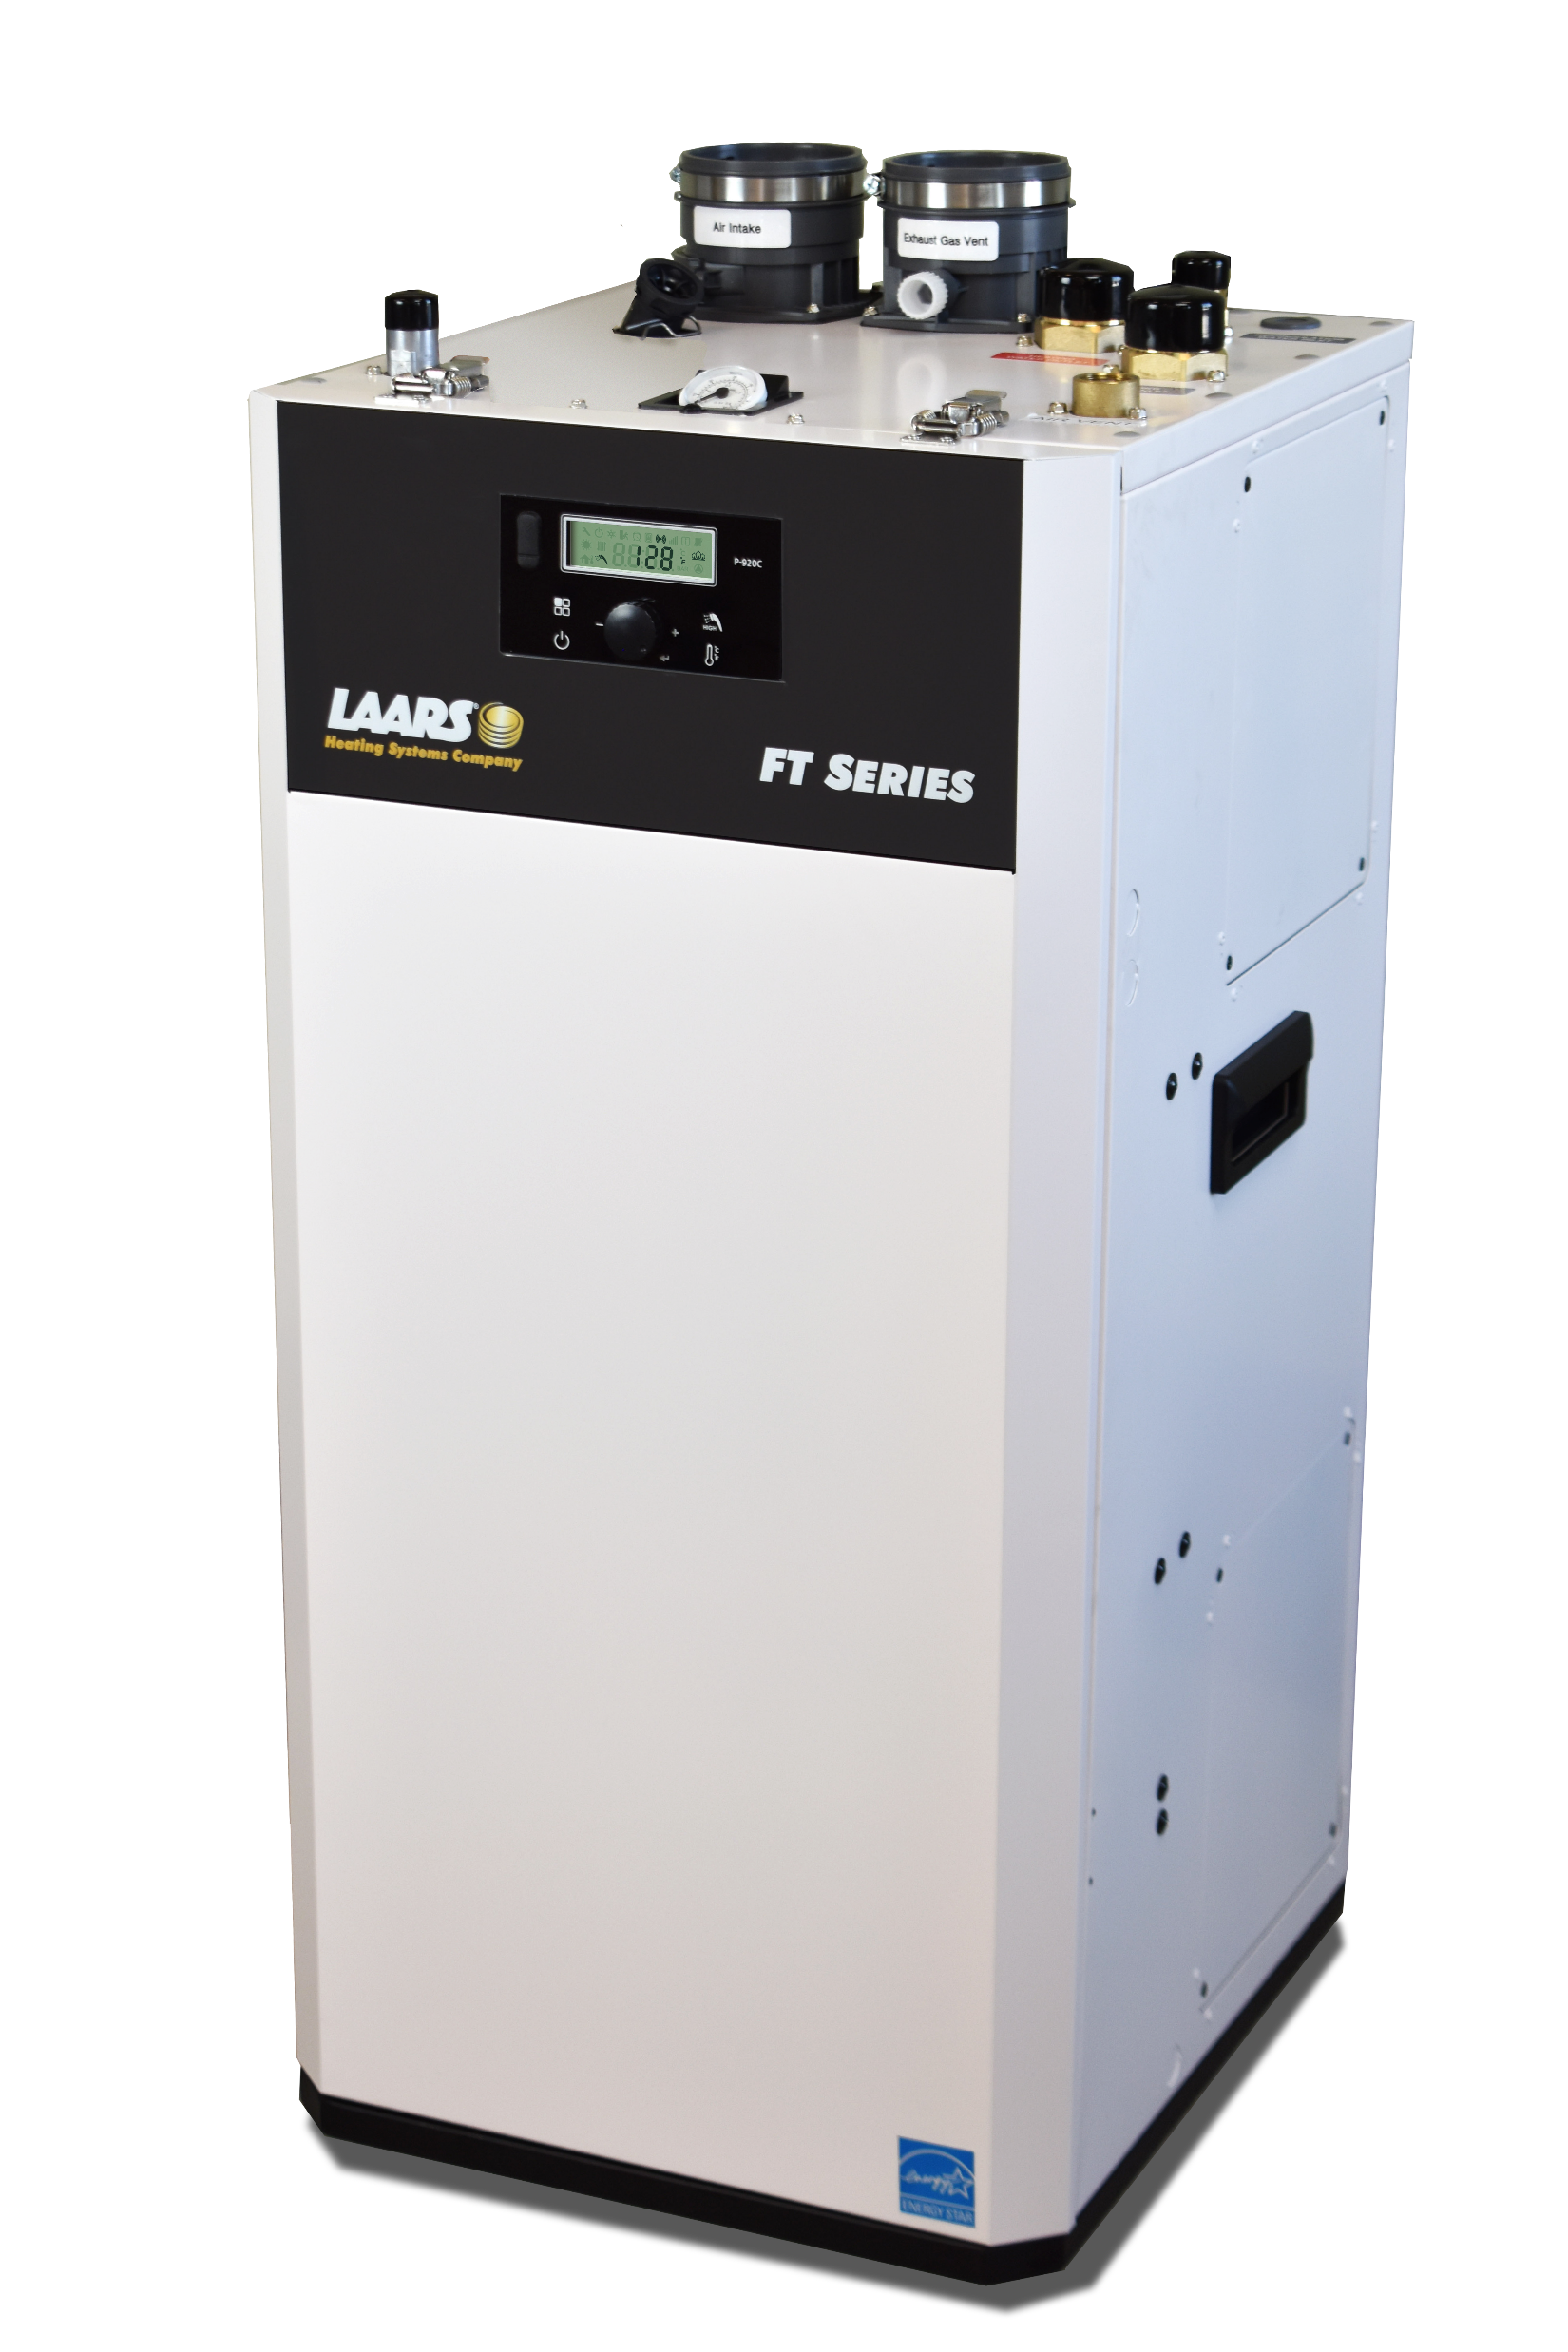 Laars Heating System Company Boiler FT Series